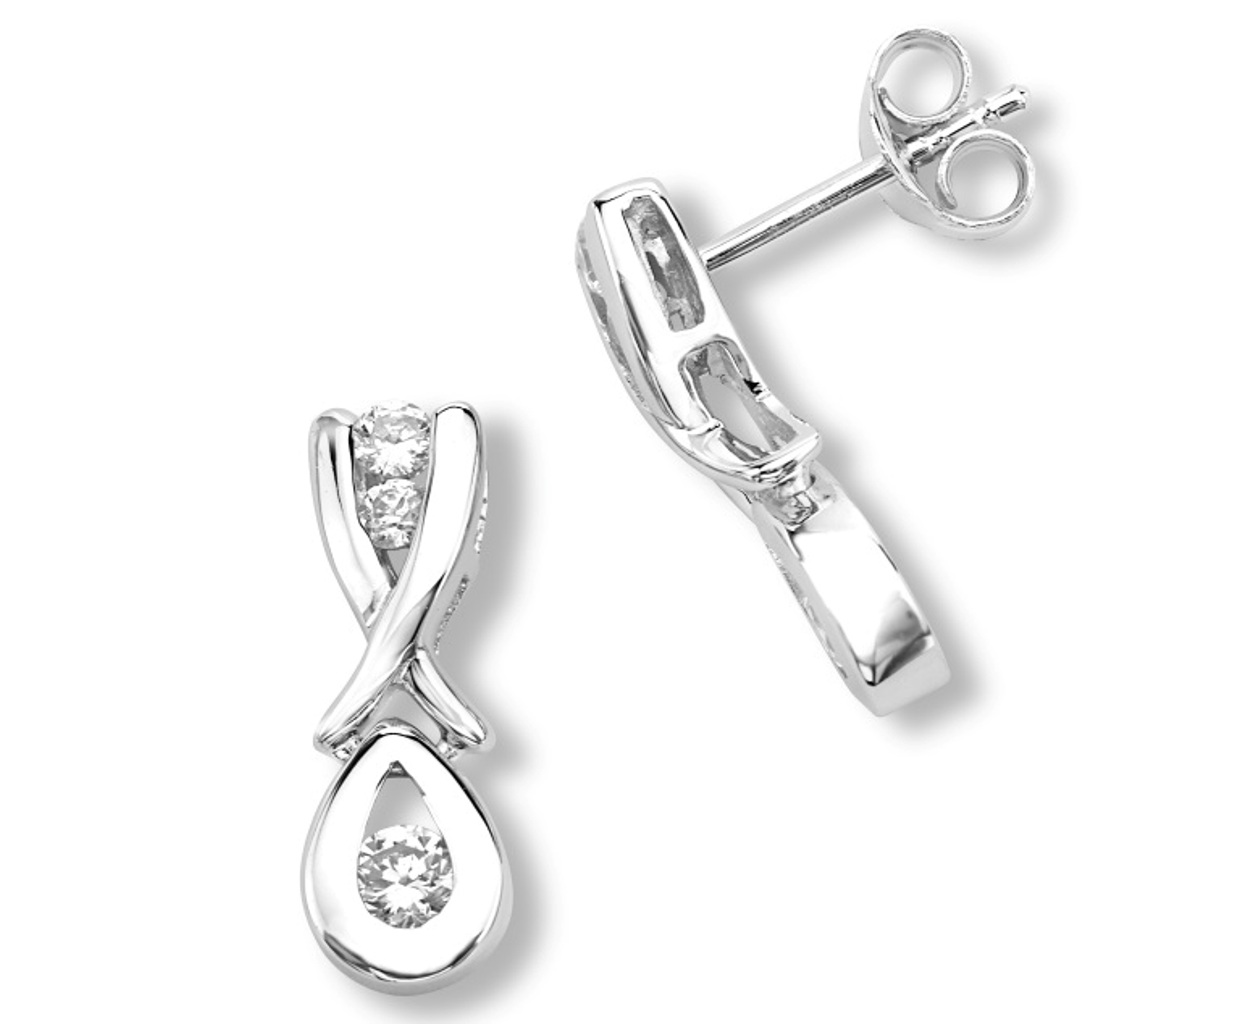 Round CZ Pear Earrings, Rhodium Plated Sterling Silver.